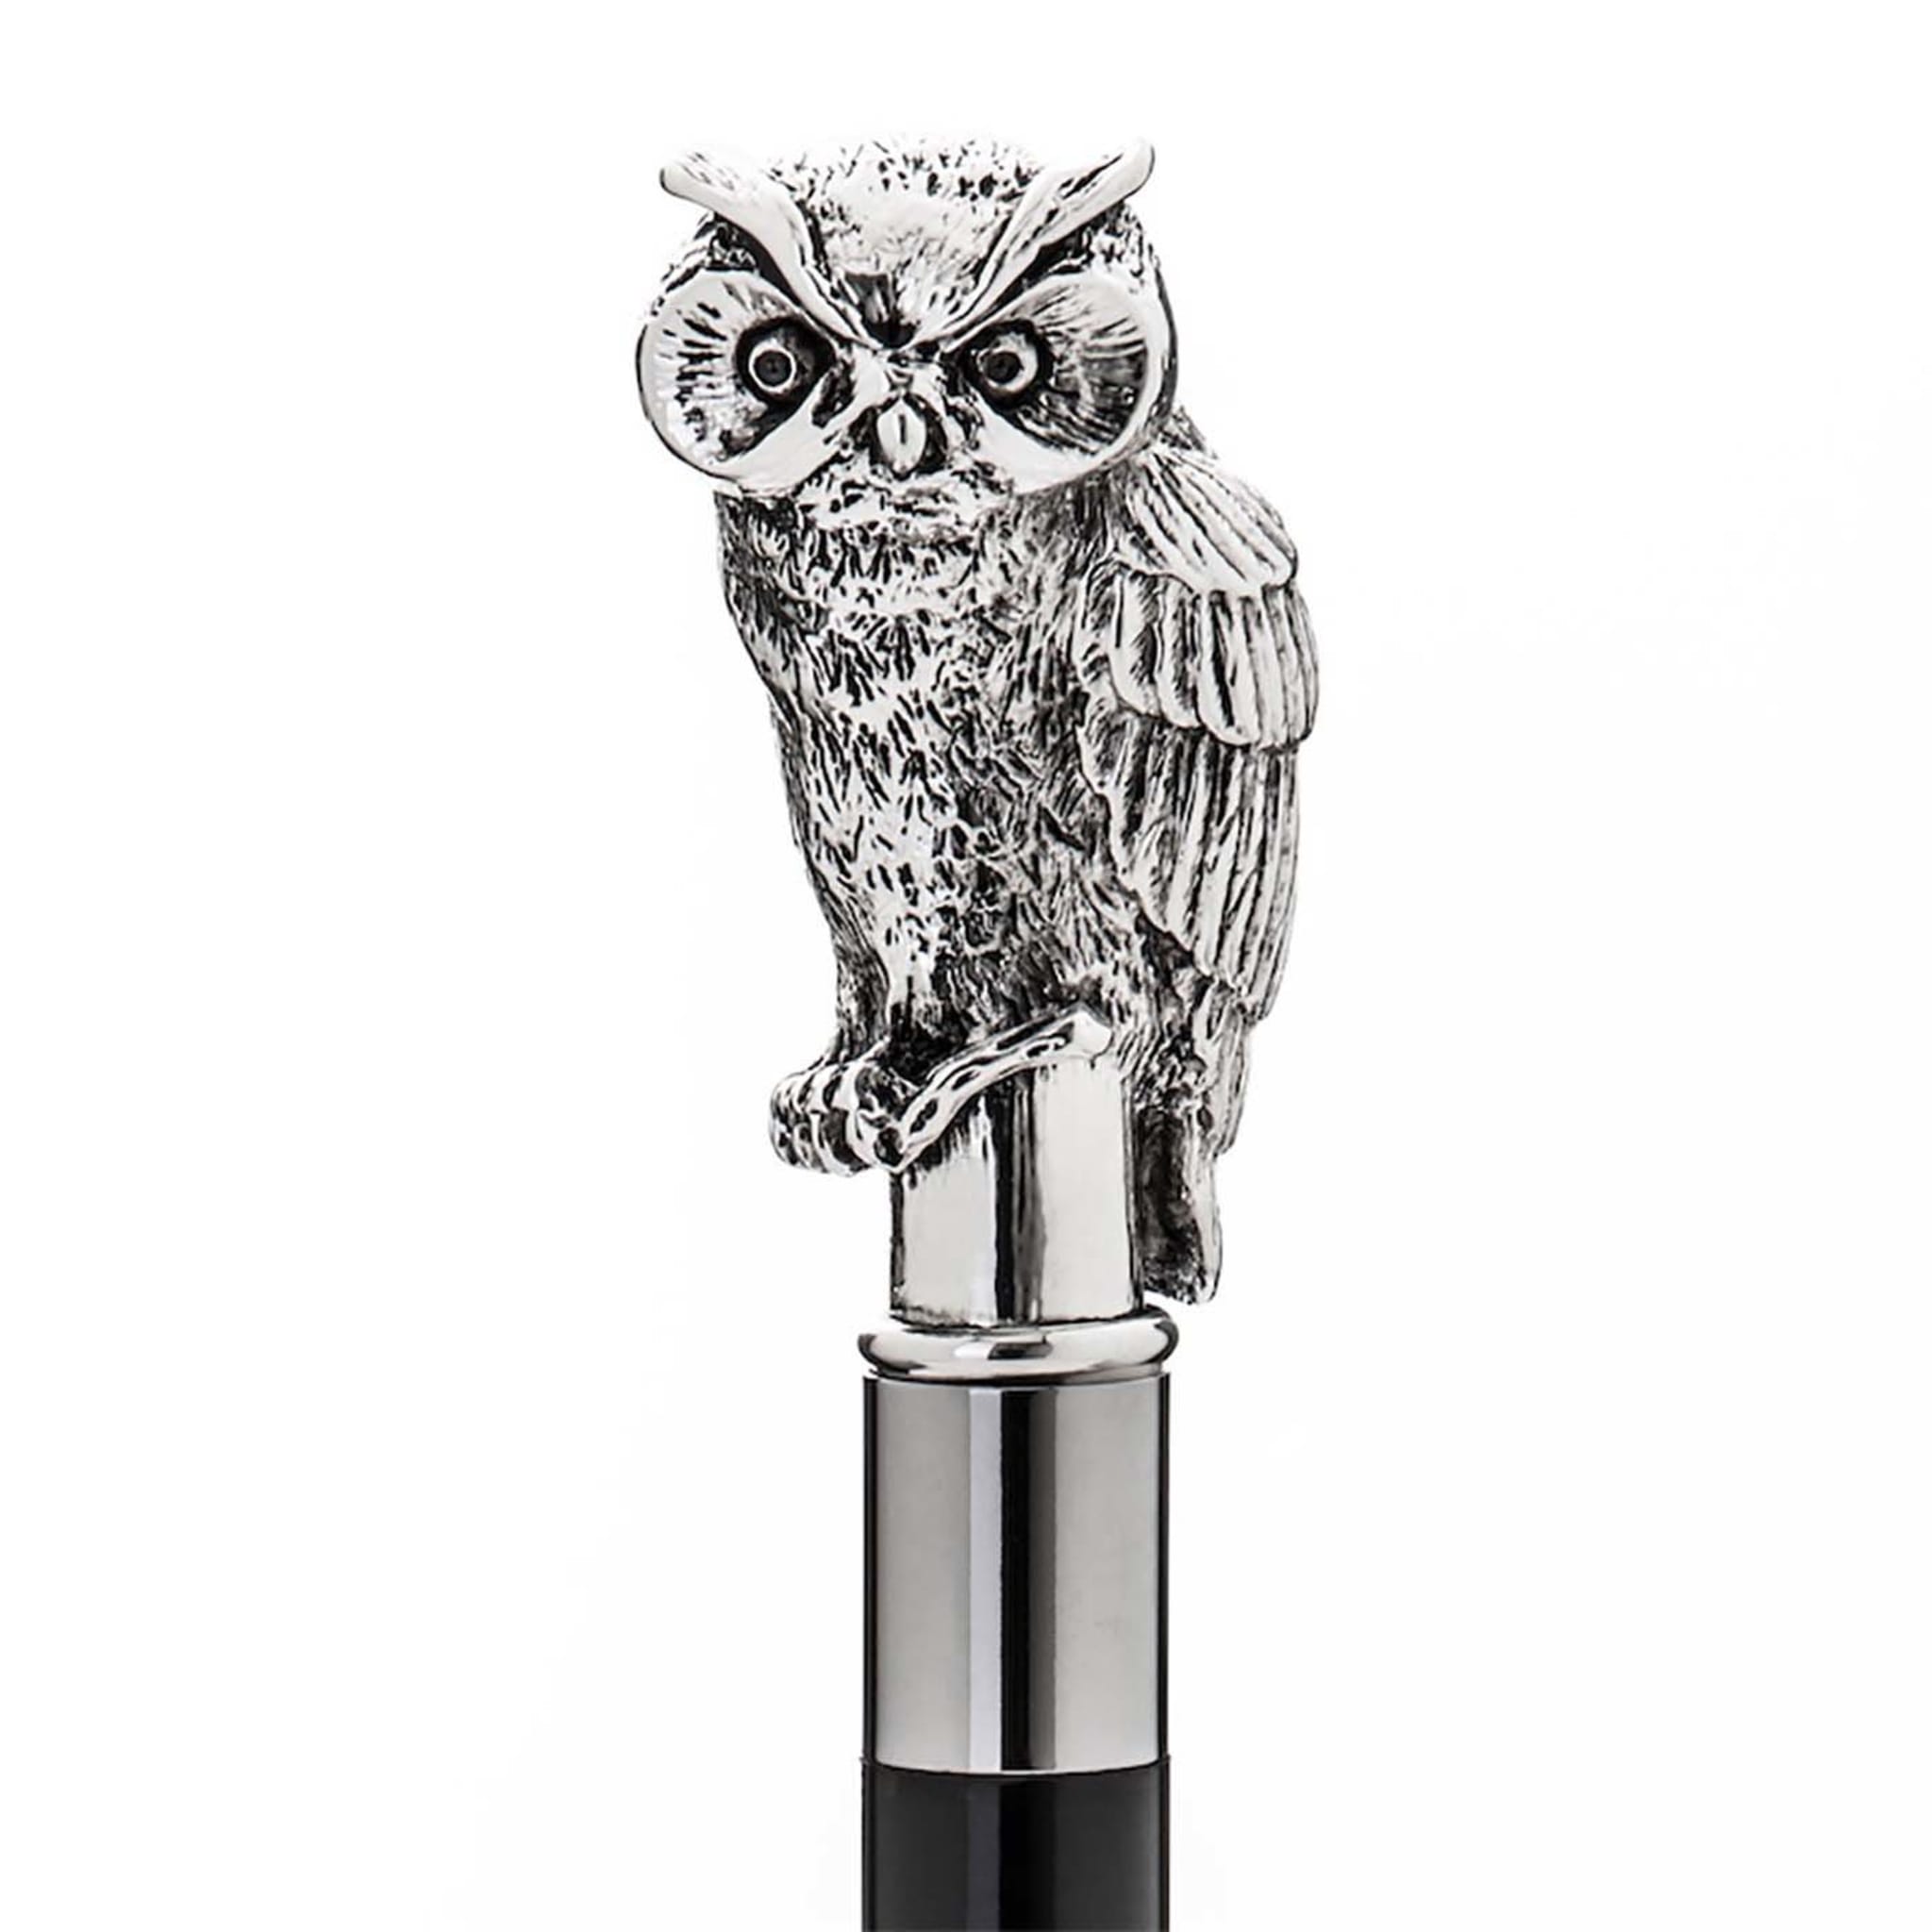 Silver Owl Shoehorn - Alternative view 1